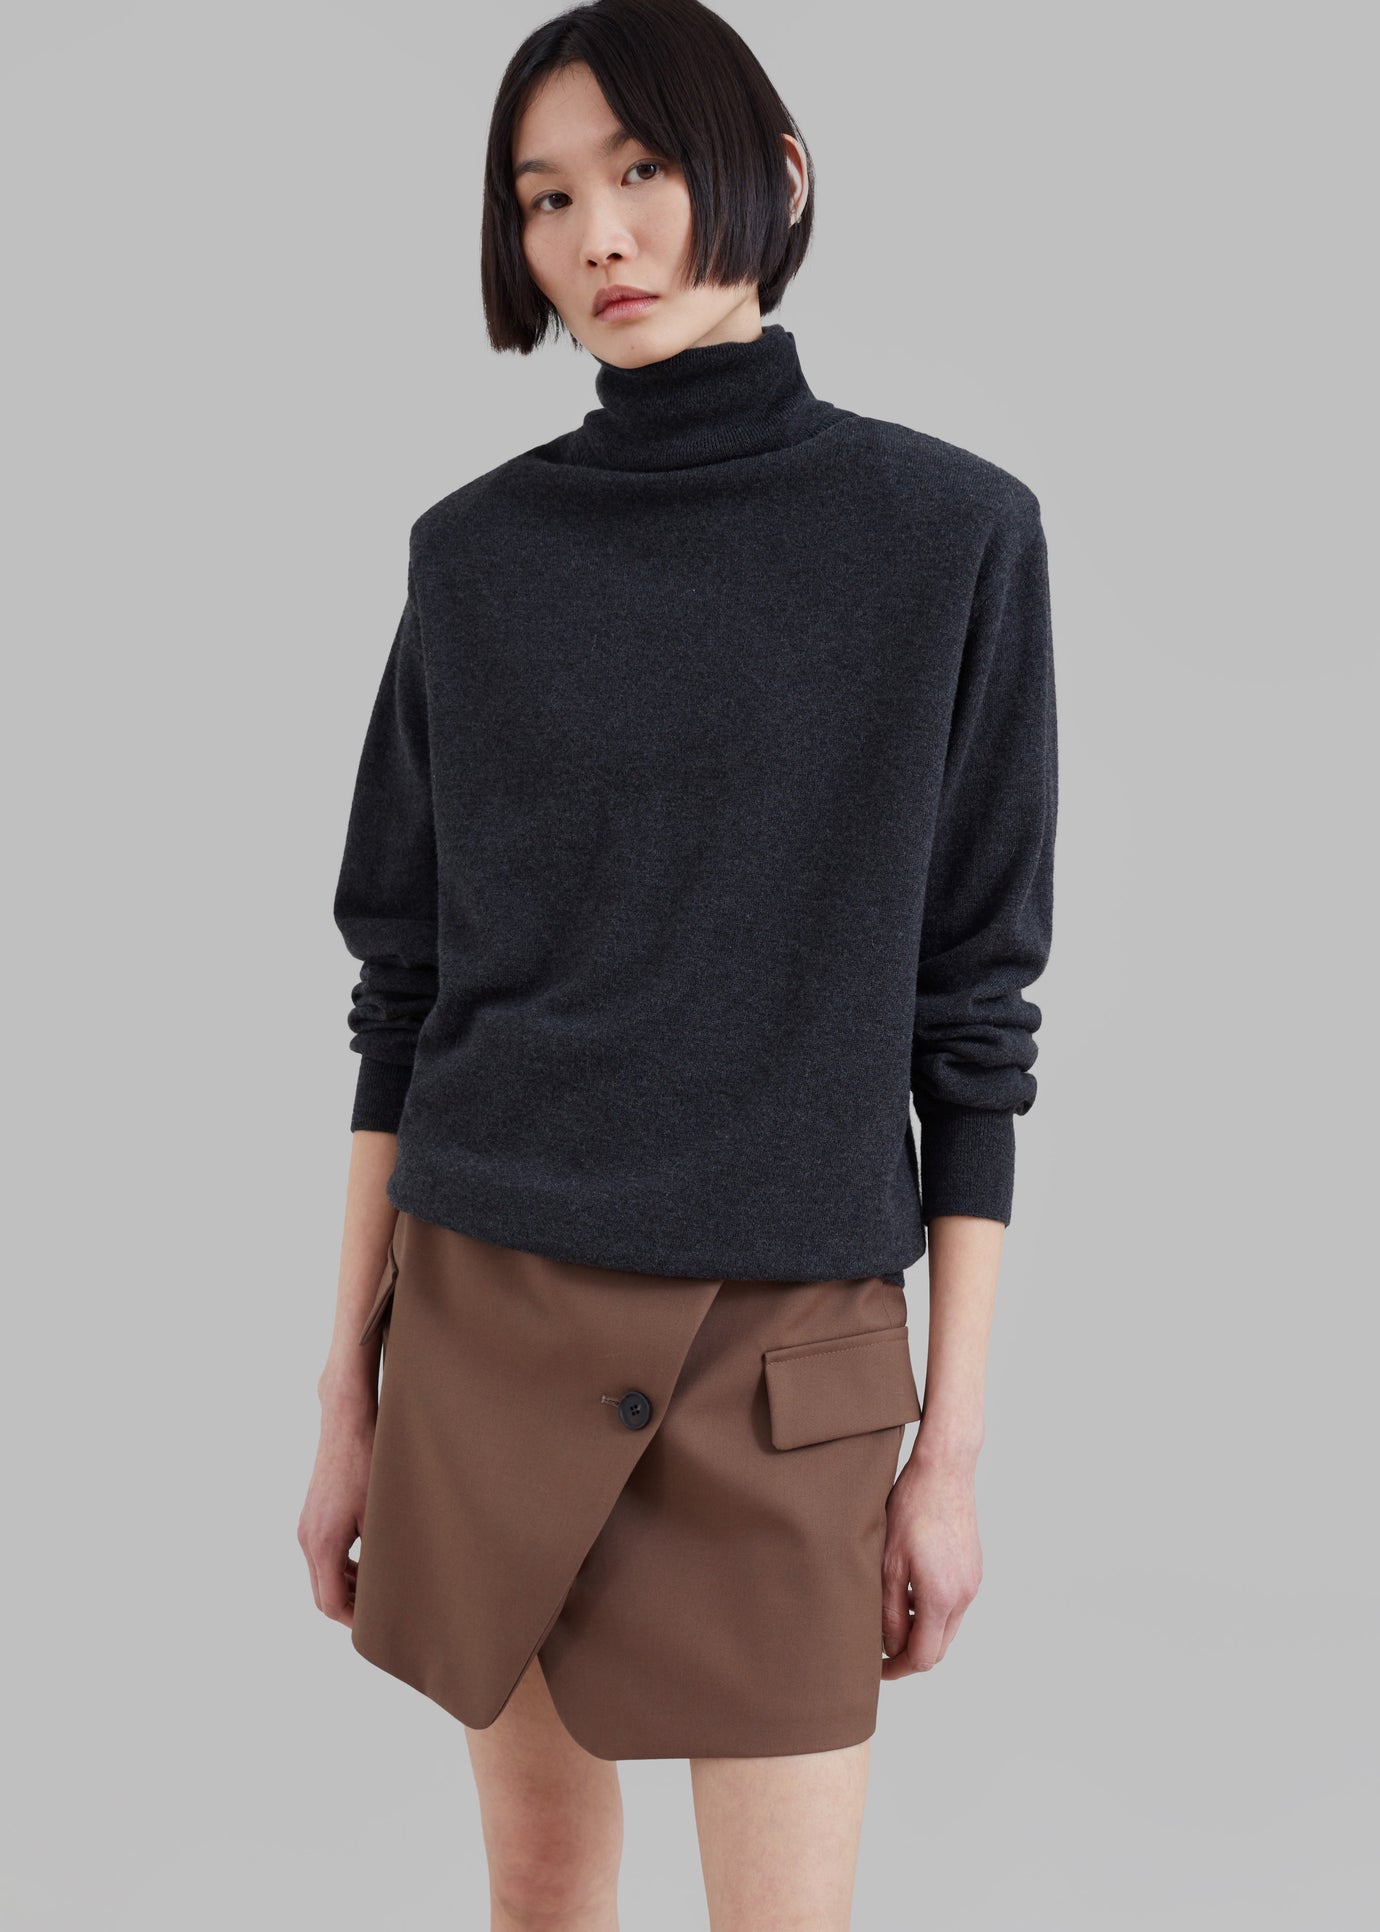 Ines Thin Padded Turtleneck - Charcoal - 1